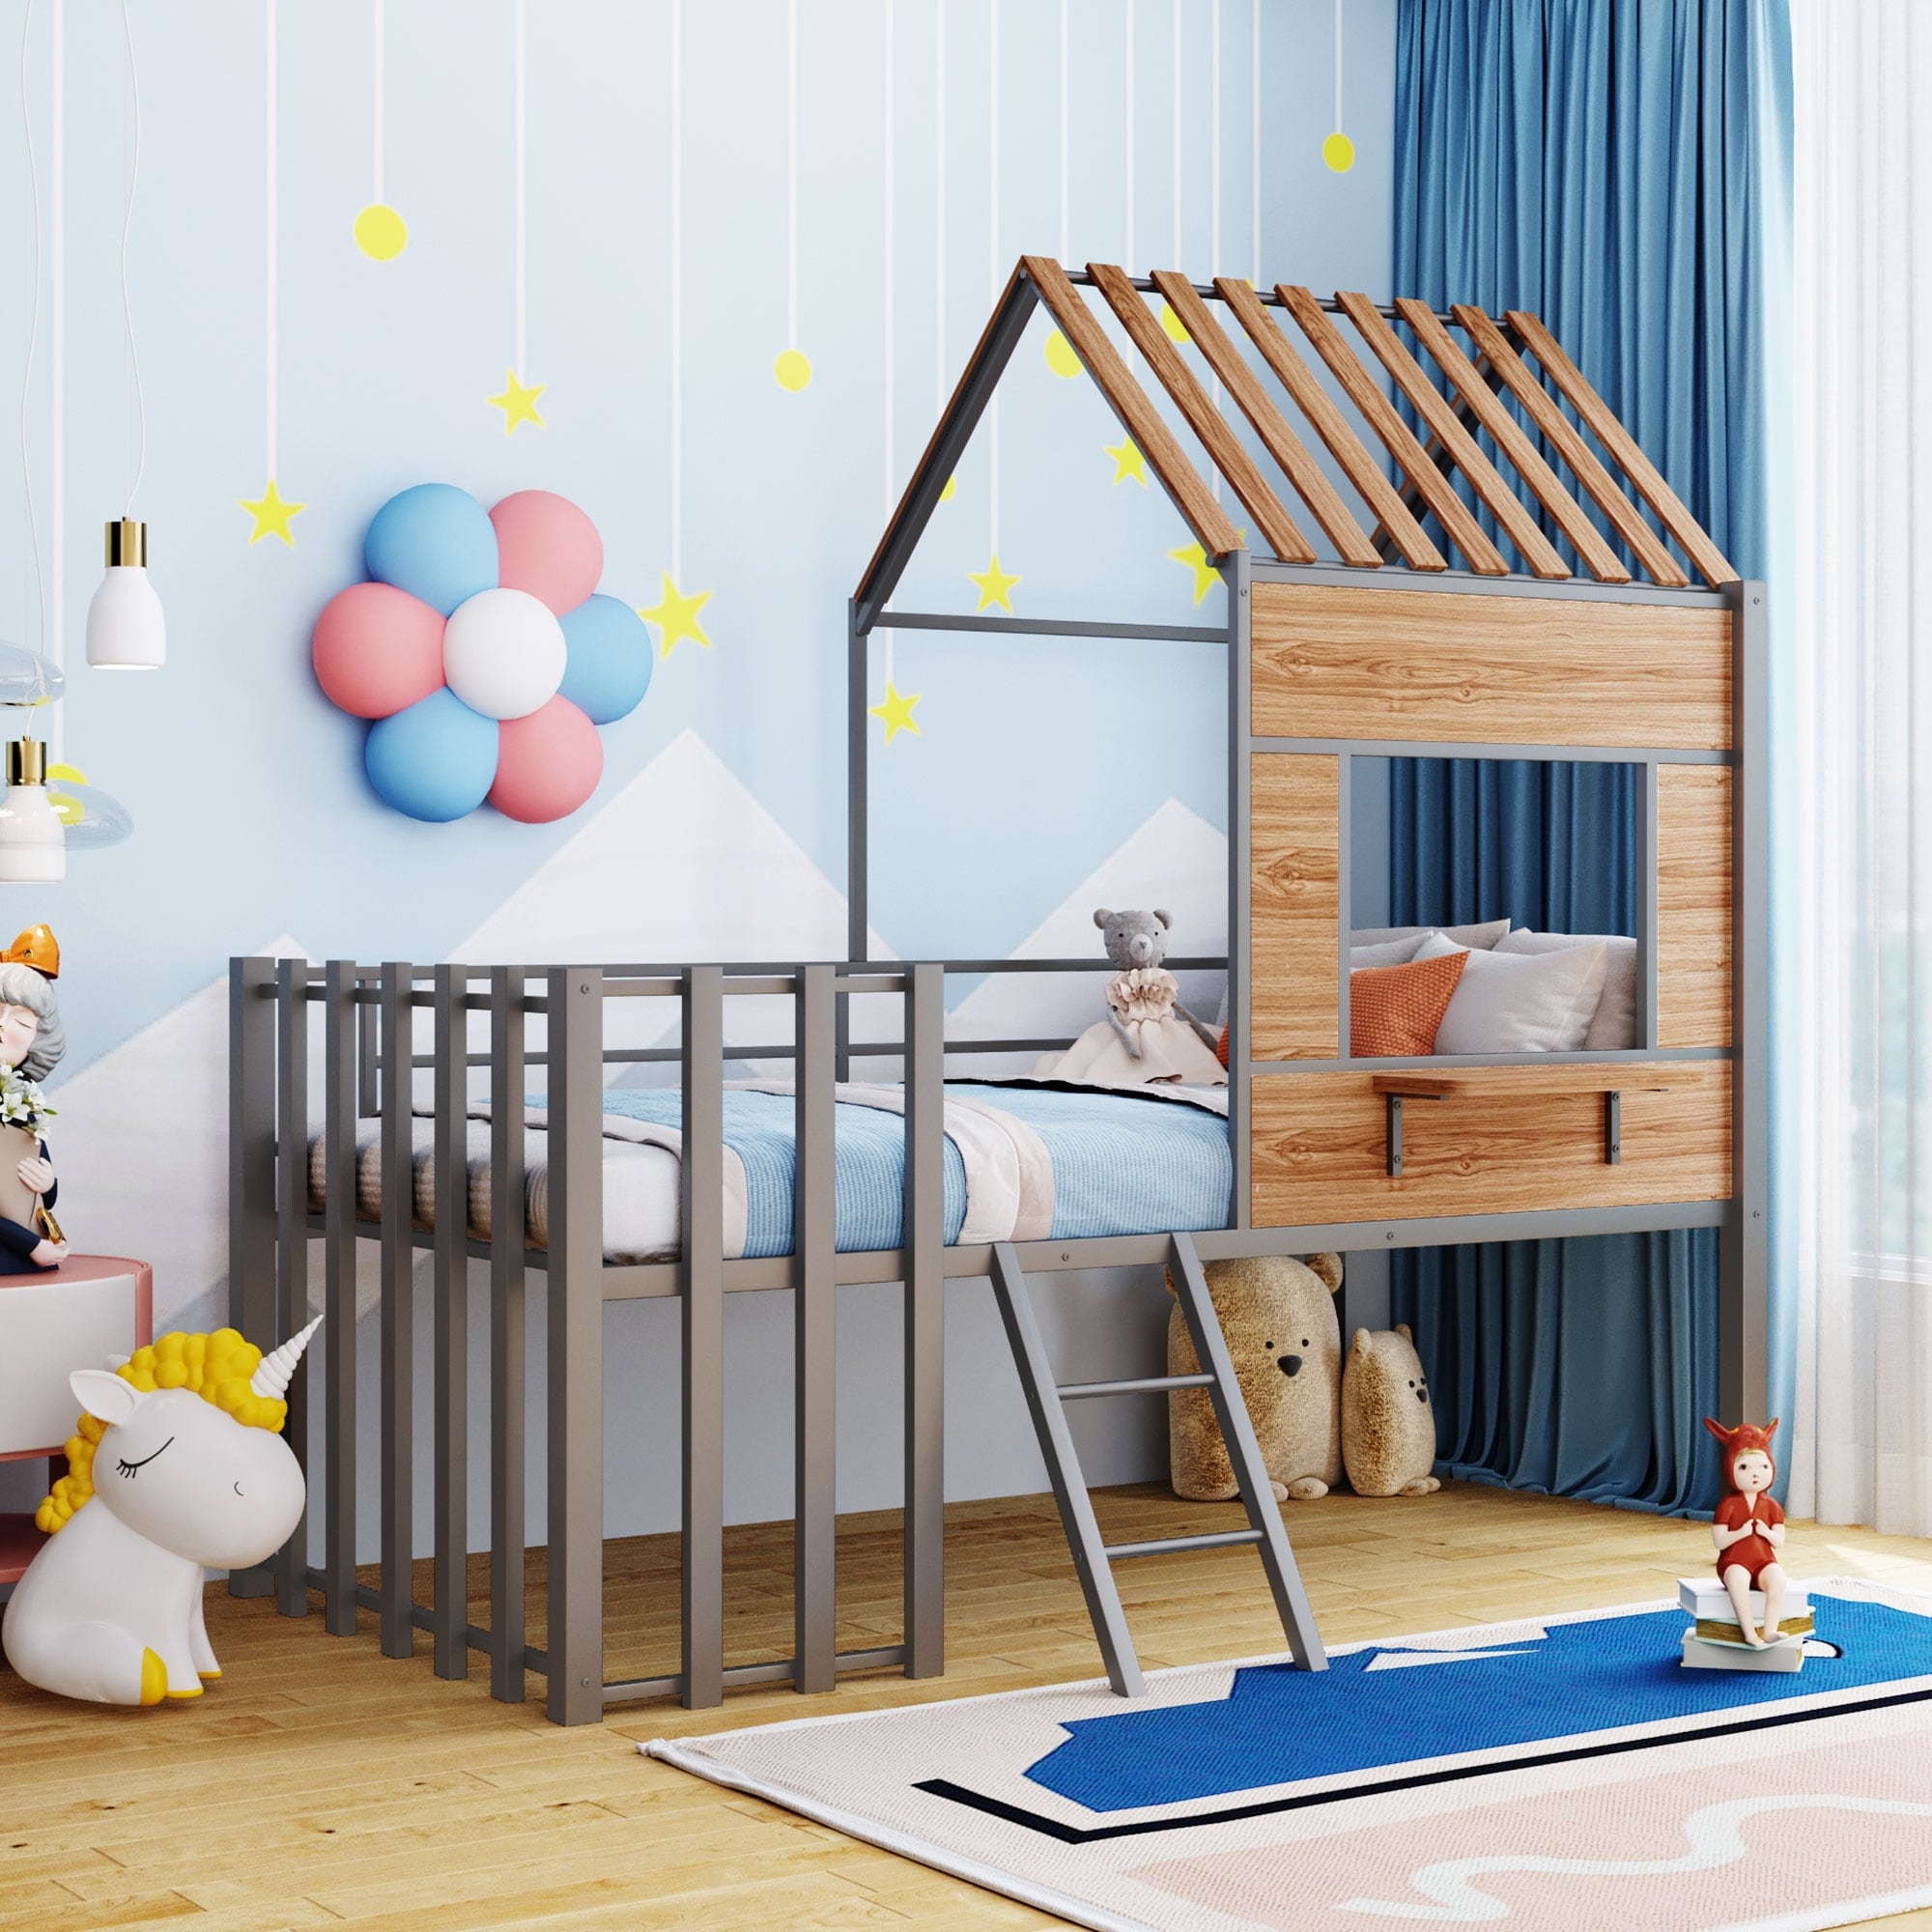 Twin Size Loft Bed Kids House Bed Metal Bed Frame Plus Plank Upper Bunk Full-length Guardrail with Roof and Window, Ladder